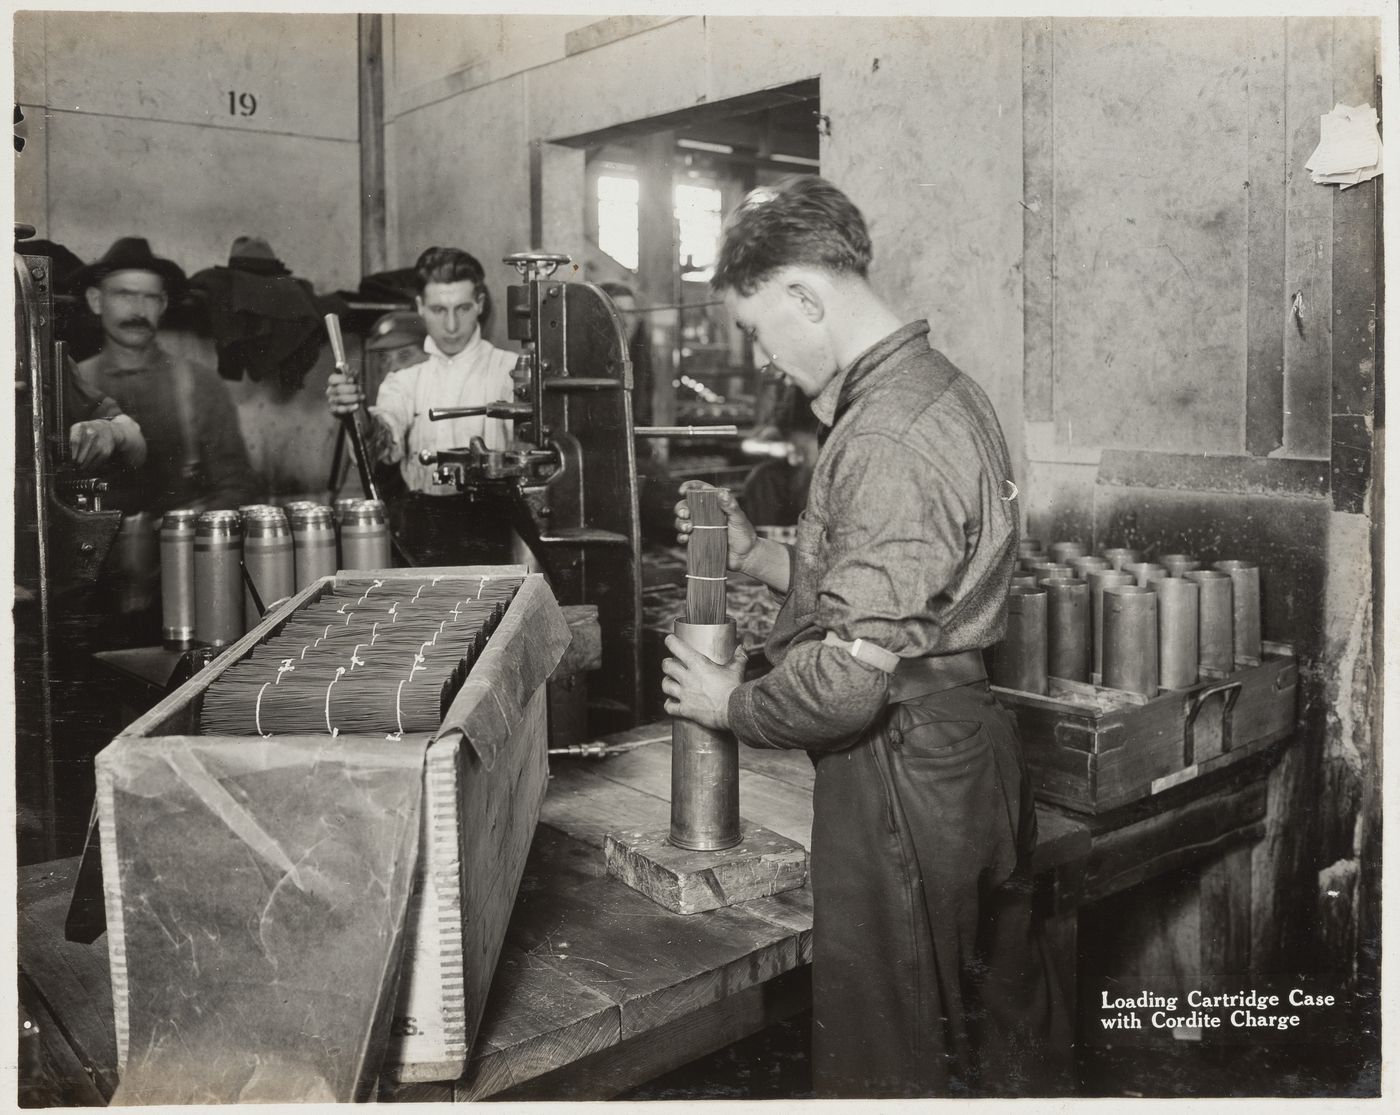 Interior view of workers loading cartridge case with cordite charge at the Energite Explosives Plant No. 3, the Shell Loading Plant, Renfrew, Ontario, Canada